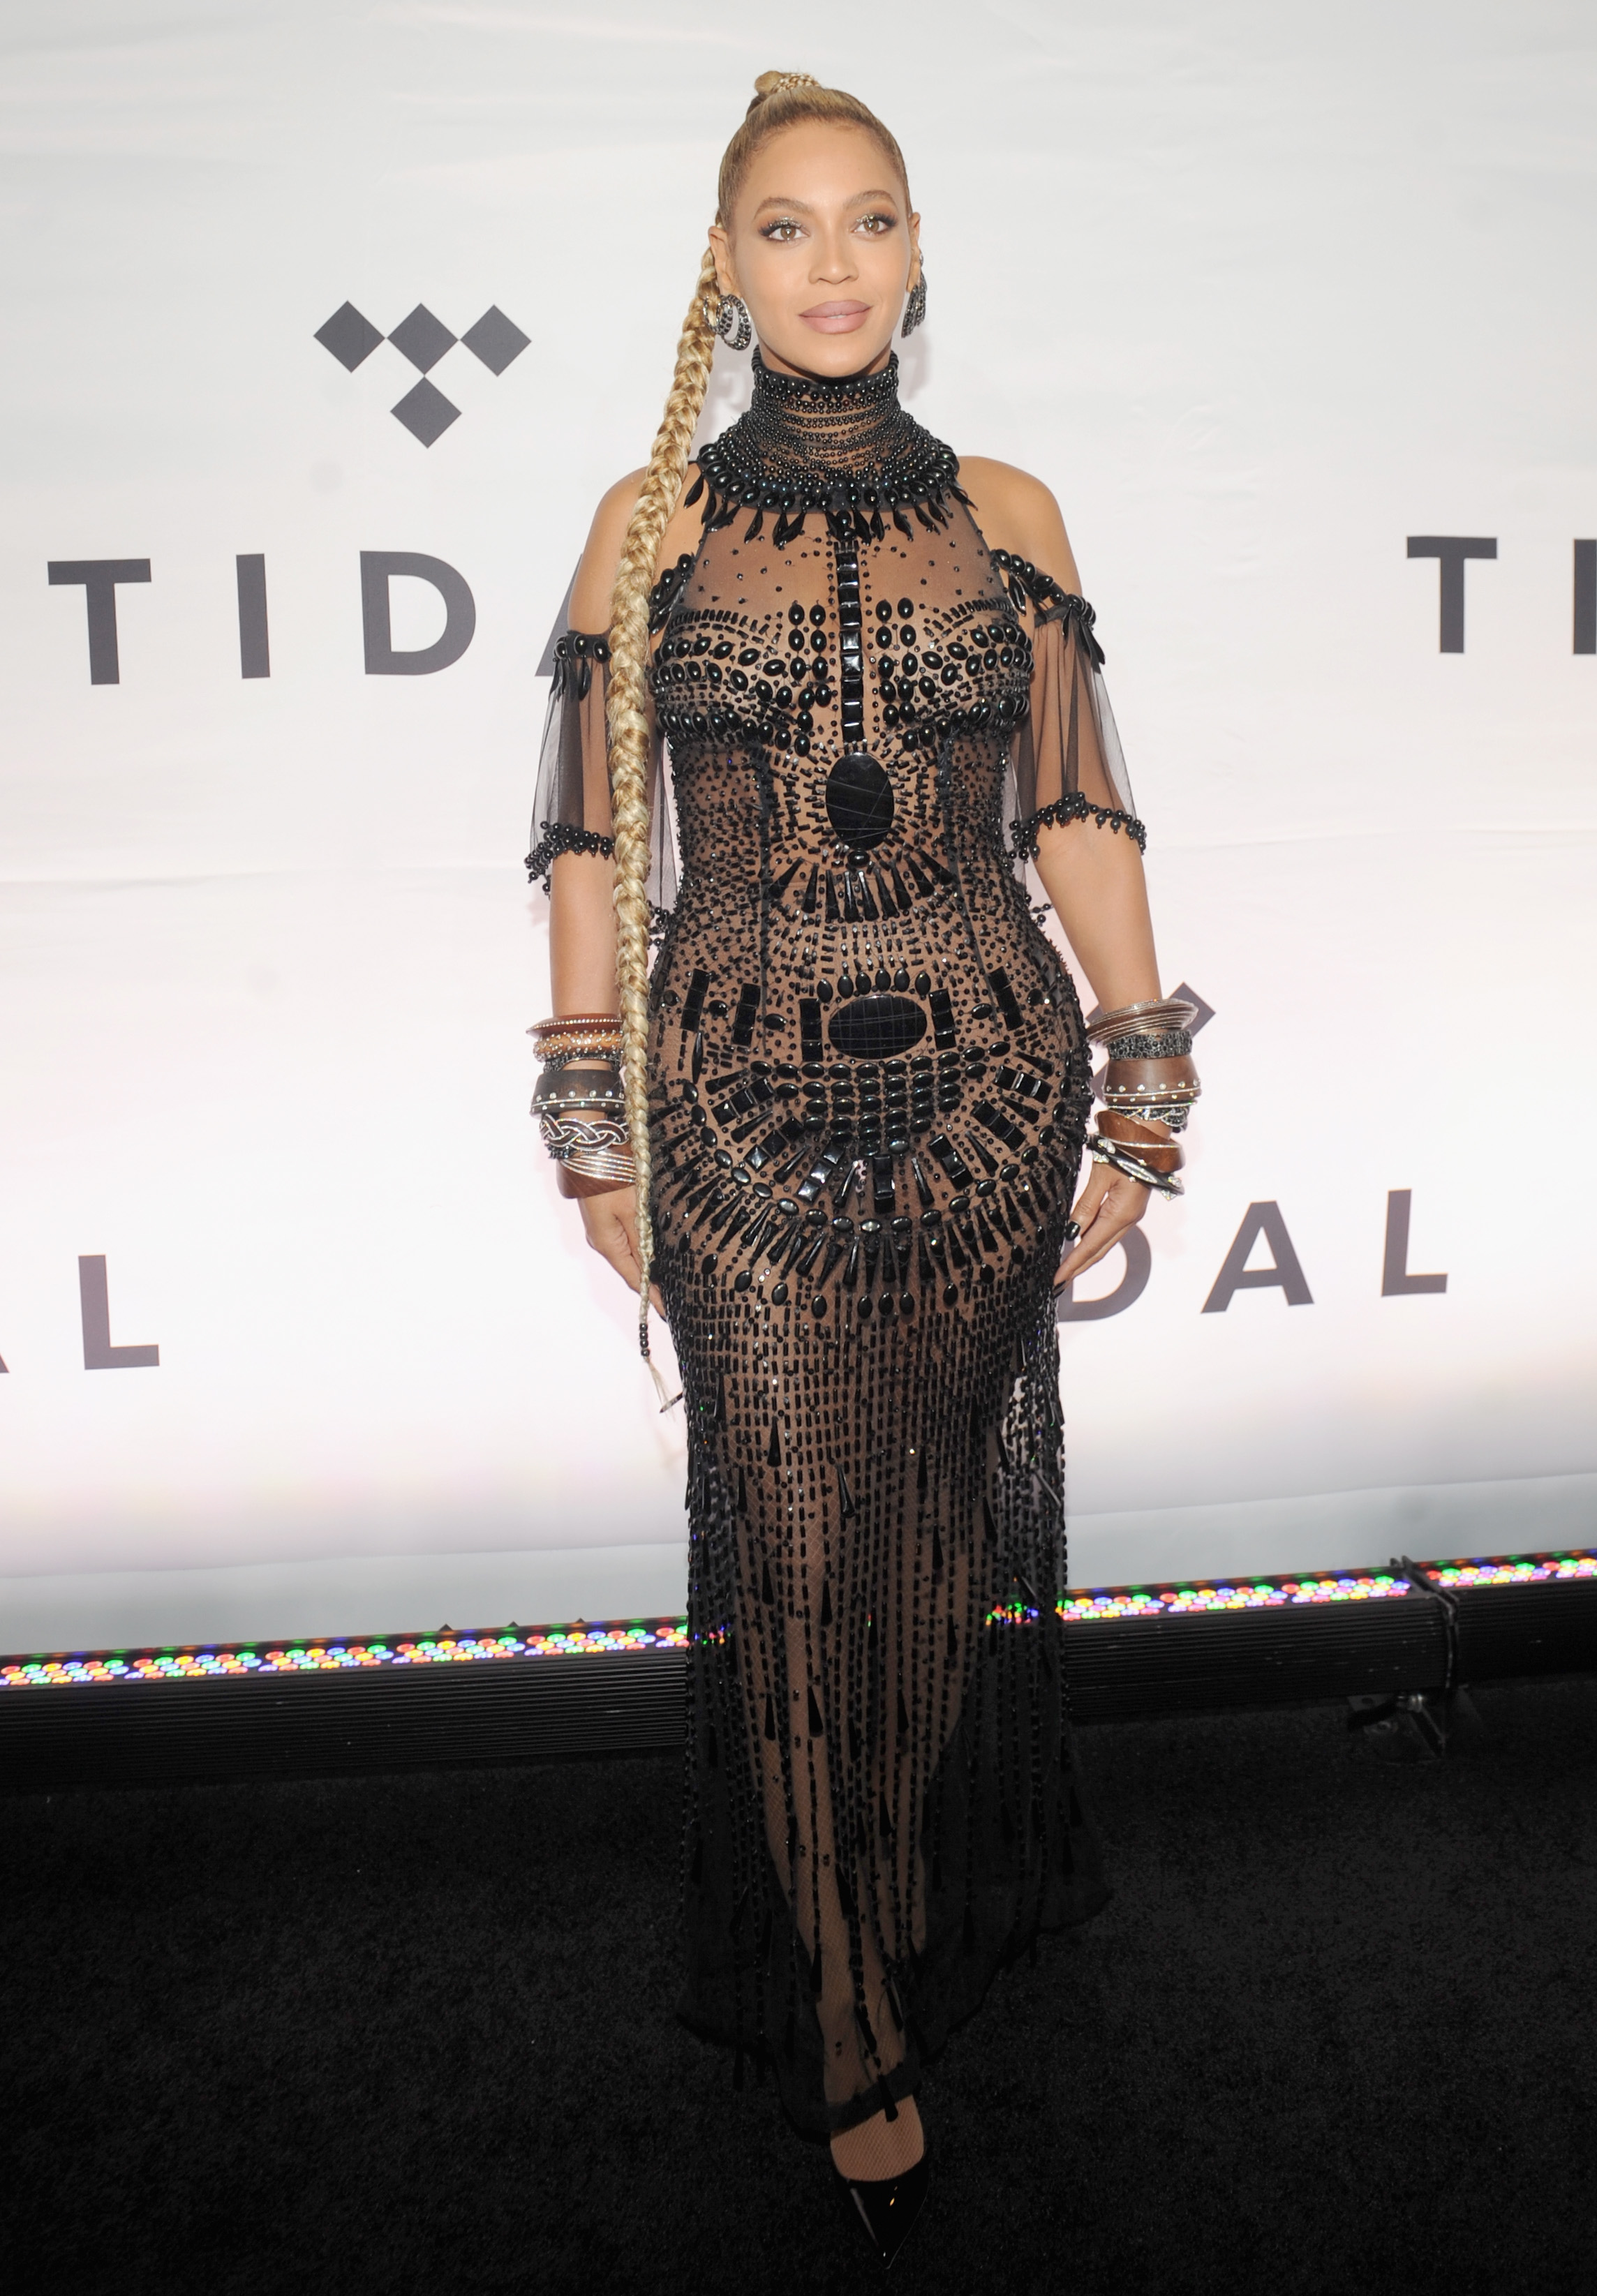 NEW YORK, NY - OCTOBER 15:  Beyonce attends TIDAL X: 1015 on October 15, 2016 in New York City.  (Photo by Brad Barket/Getty Images for TIDAL)